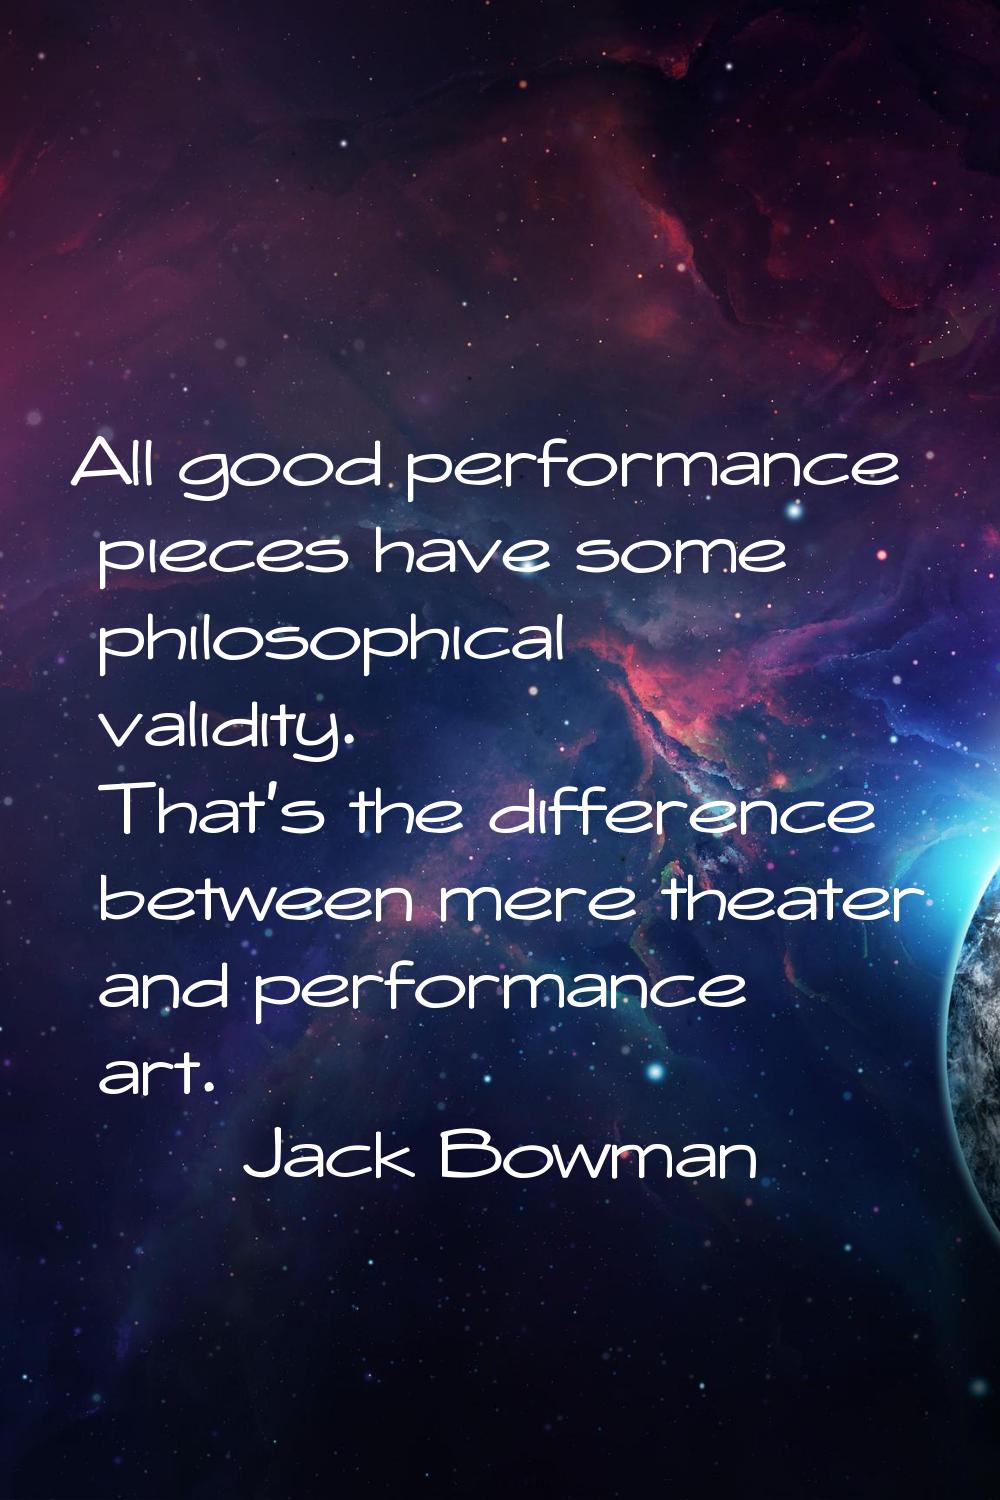 All good performance pieces have some philosophical validity. That's the difference between mere th